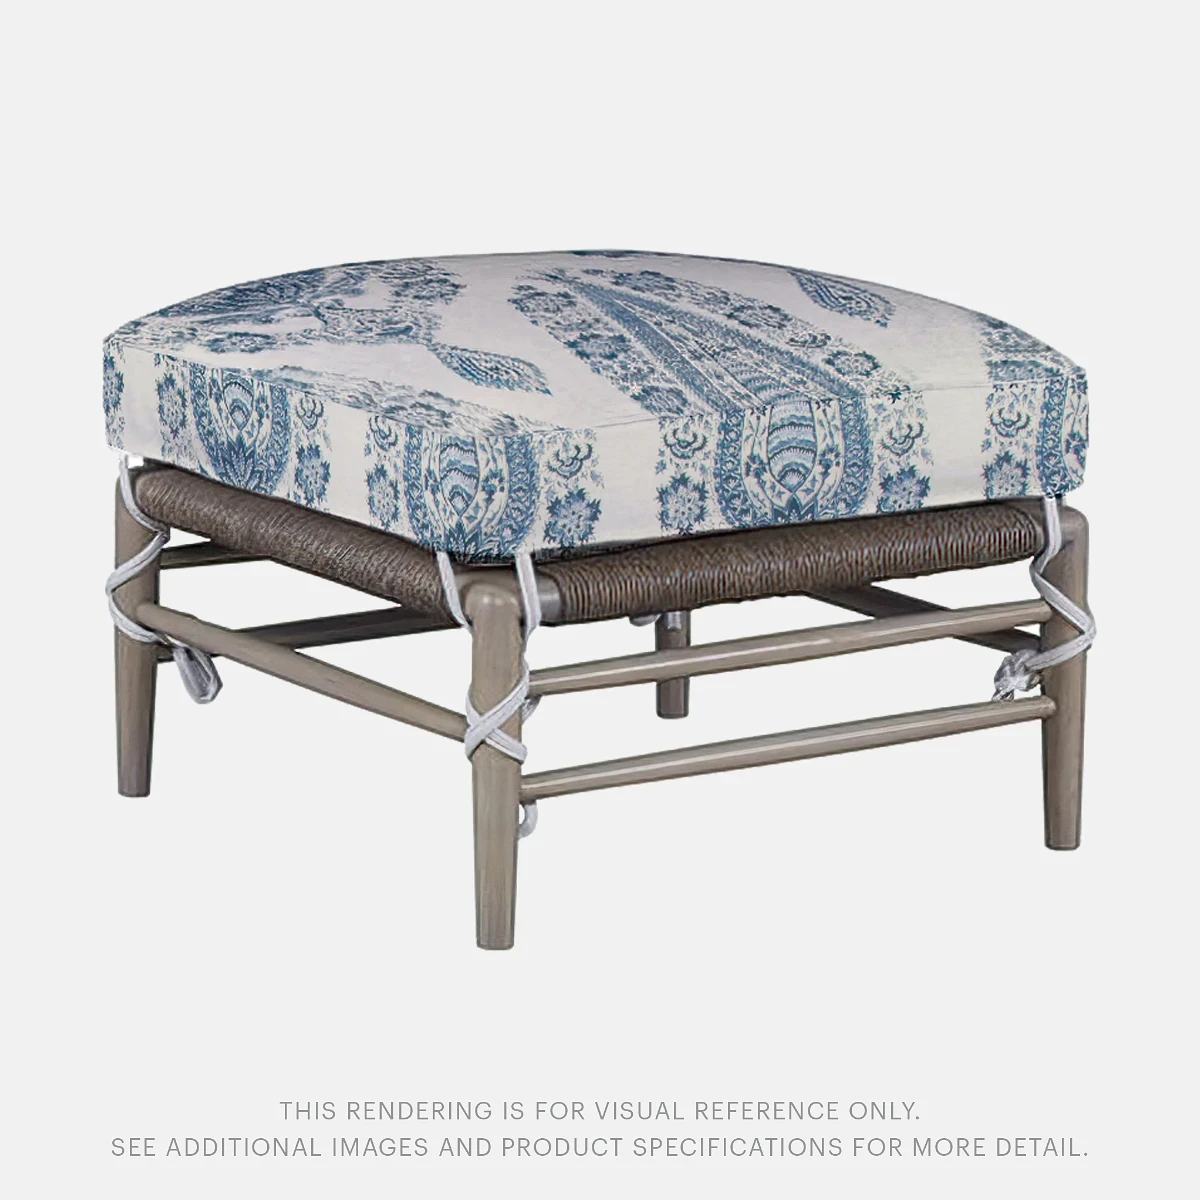 The image of an Ivy Ottoman product